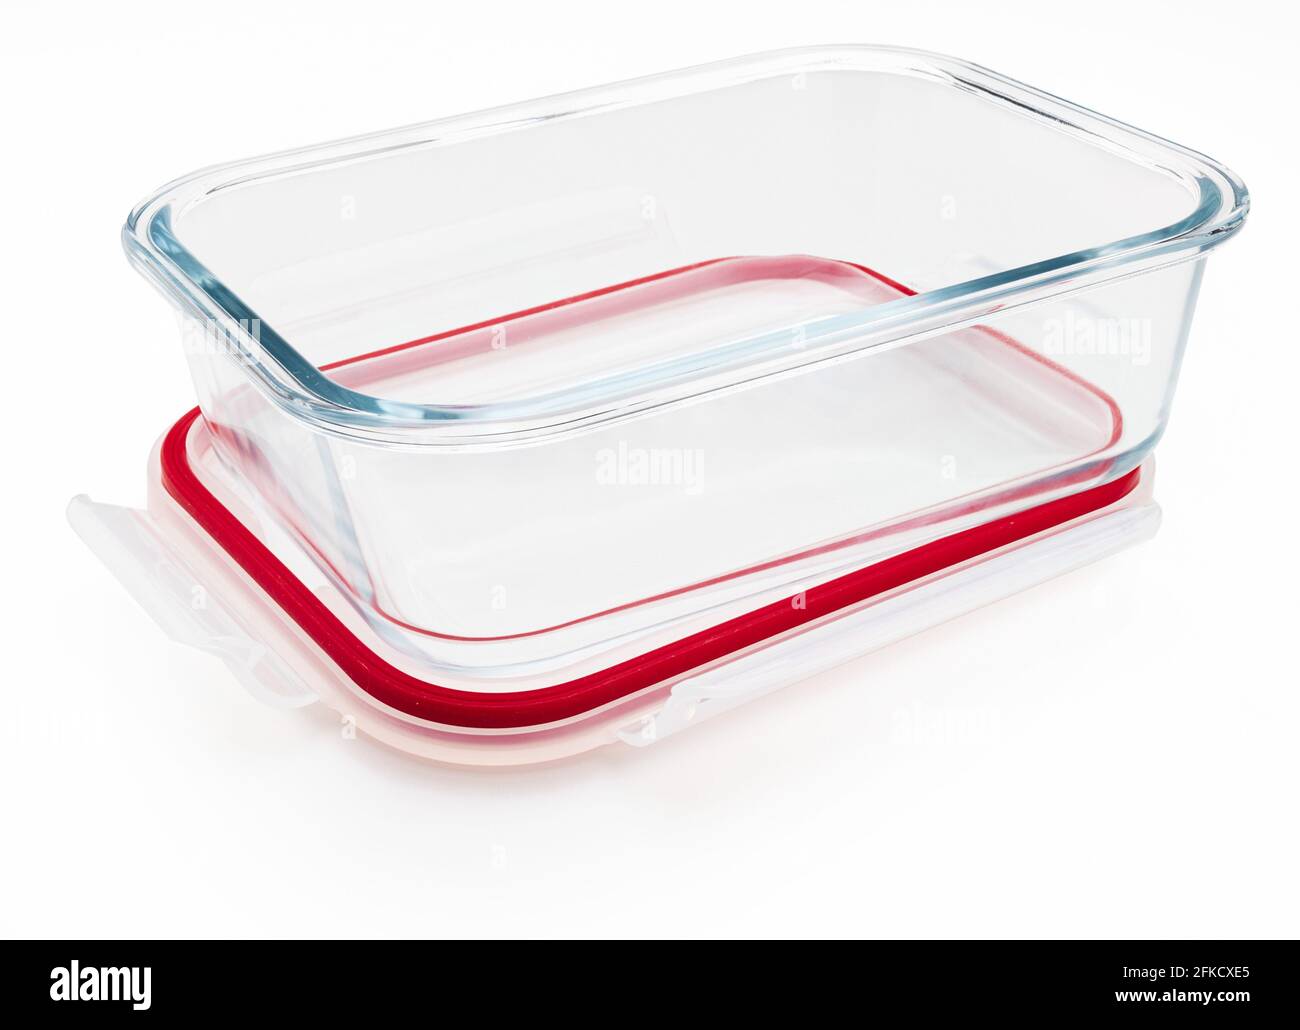 Glass tupperware stock photography images - Alamy